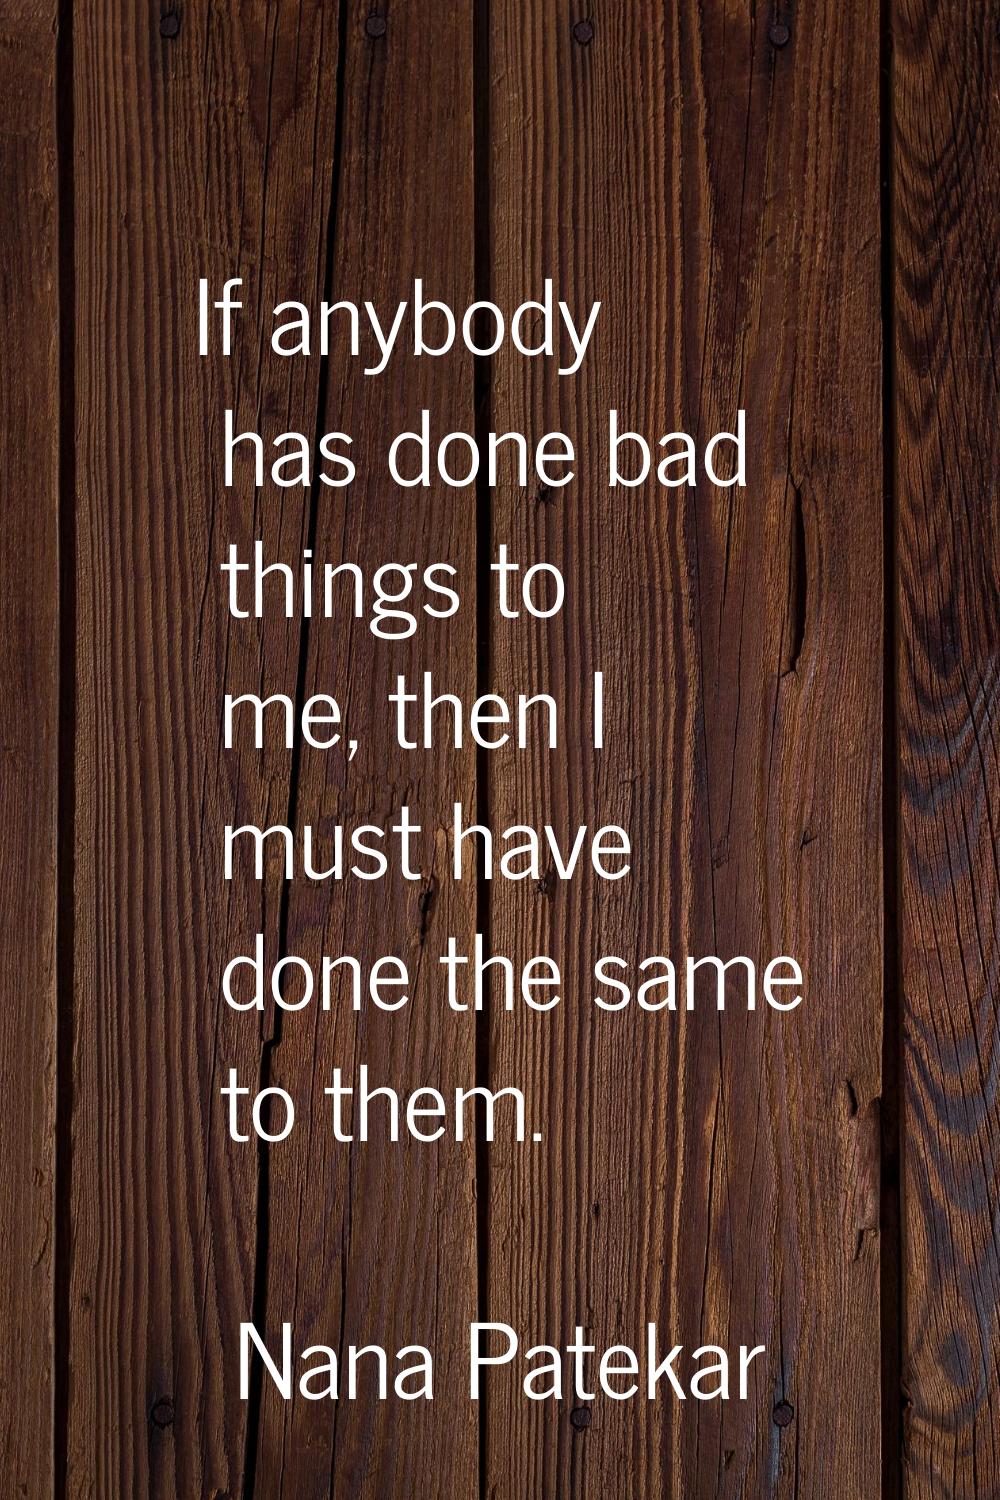 If anybody has done bad things to me, then I must have done the same to them.